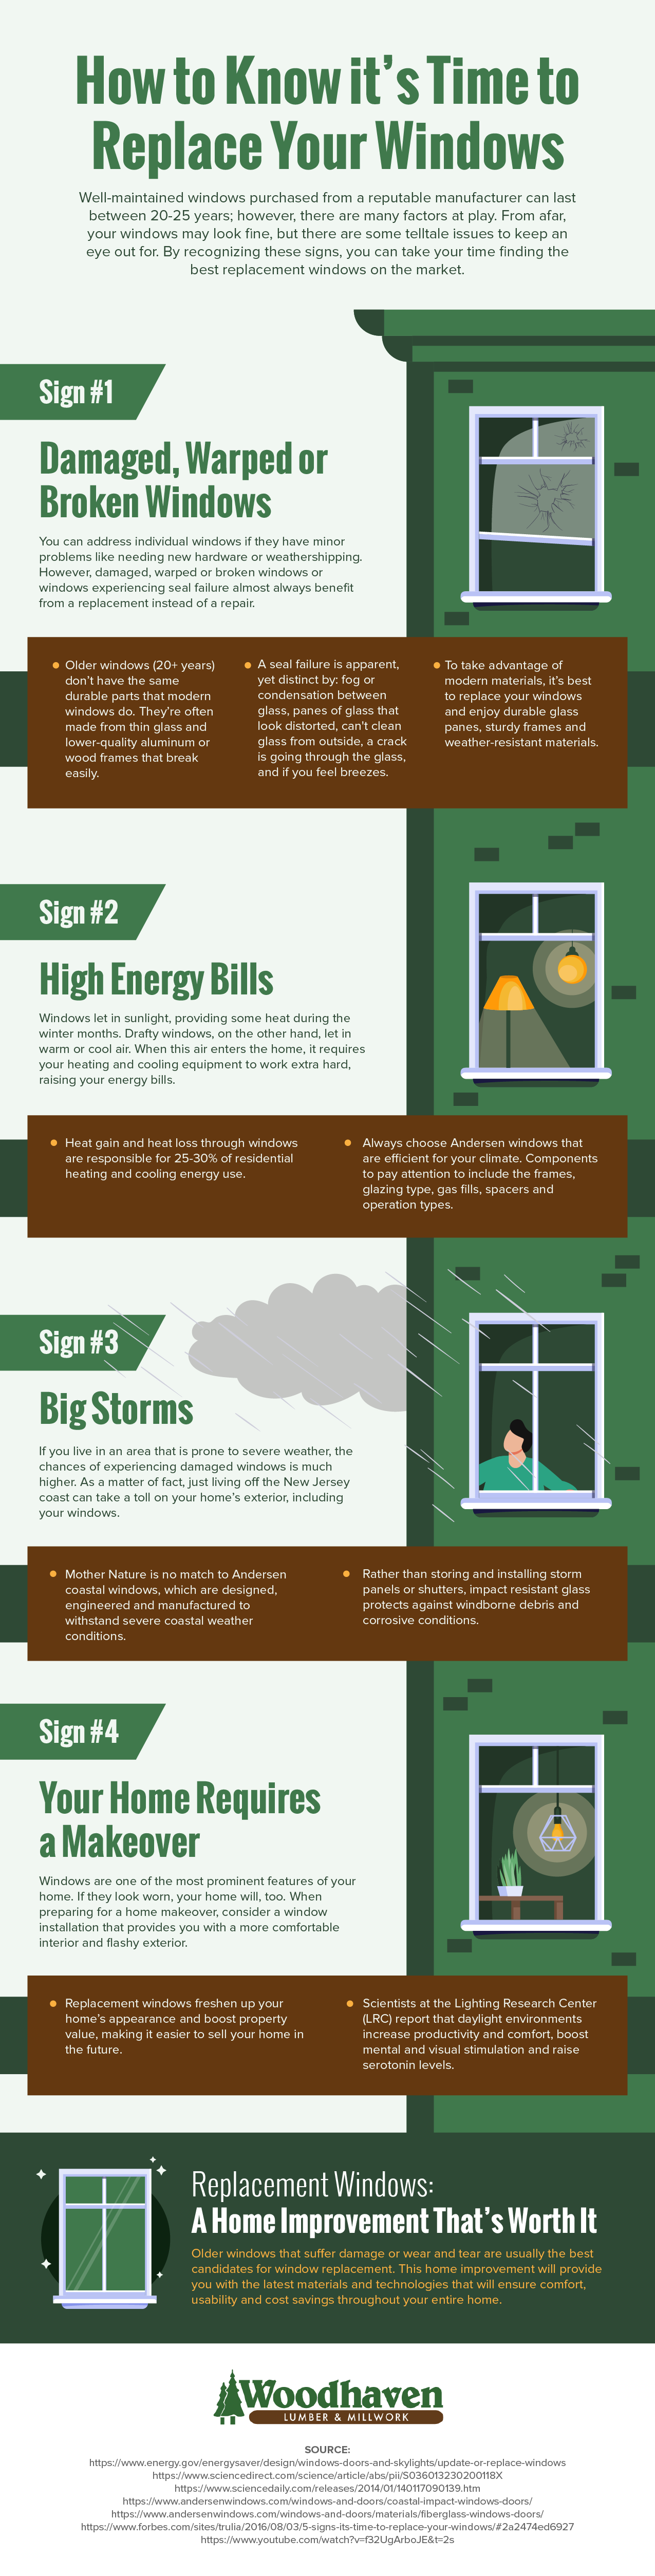 How to Know it’s Time to Replace Your Windows